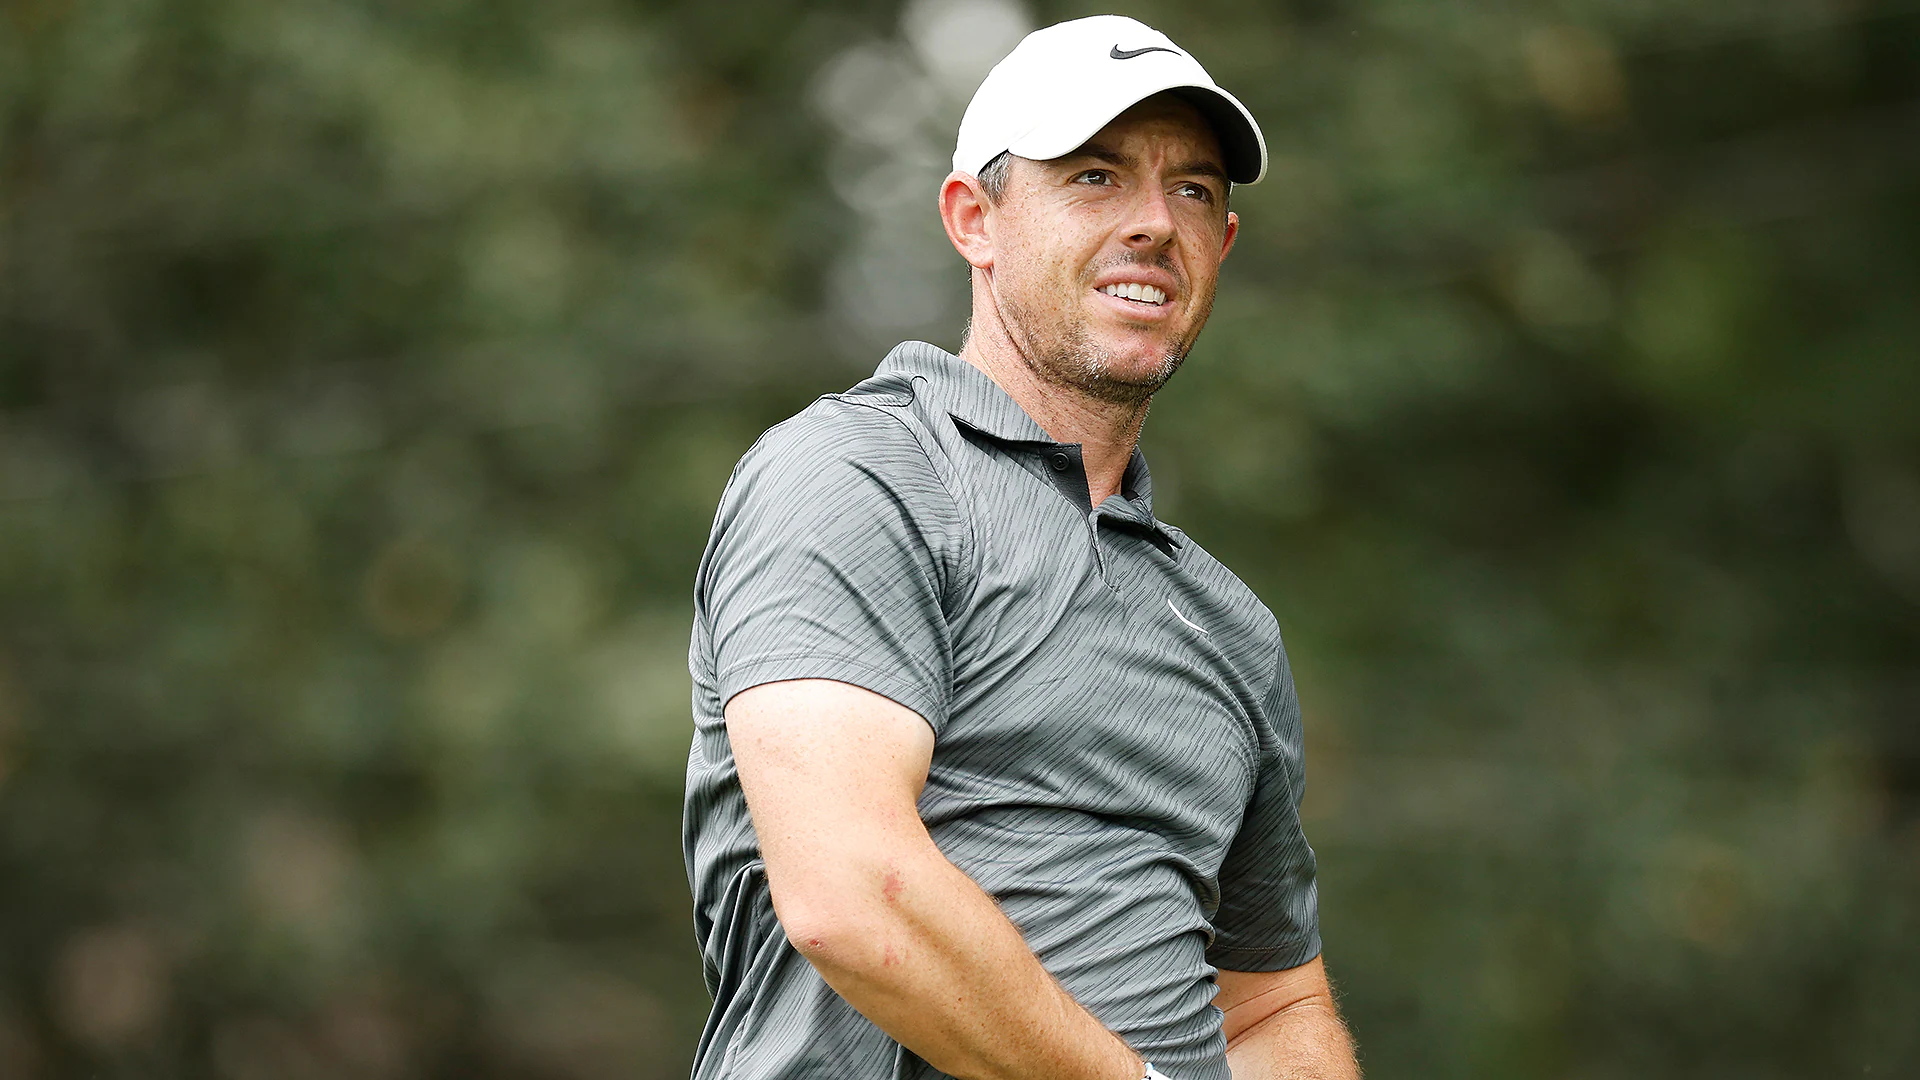 Rory McIlroy hits opening tee shot out of bounds, makes triple to start Tour Championship